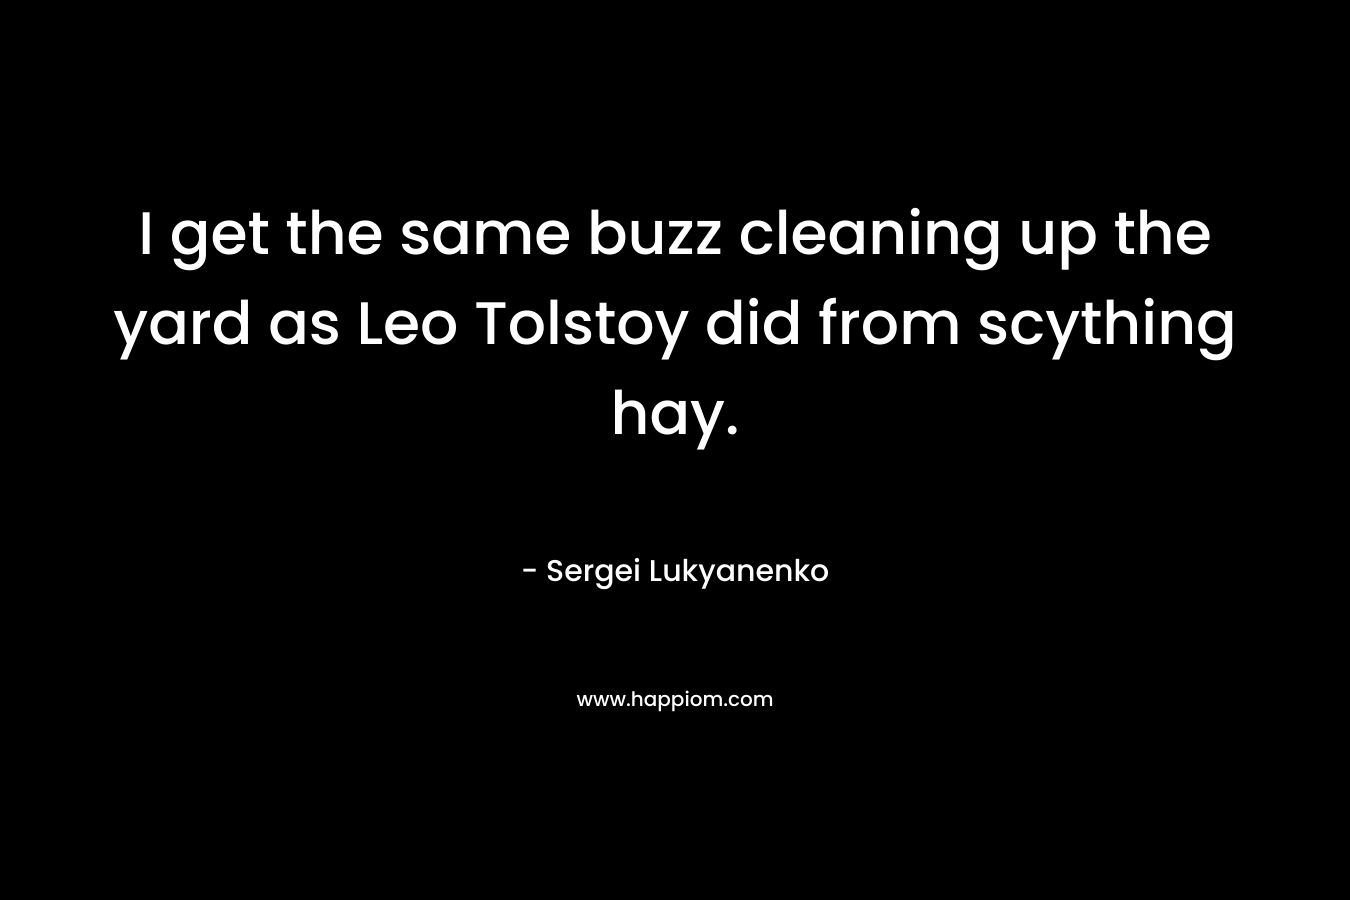 I get the same buzz cleaning up the yard as Leo Tolstoy did from scything hay. – Sergei Lukyanenko